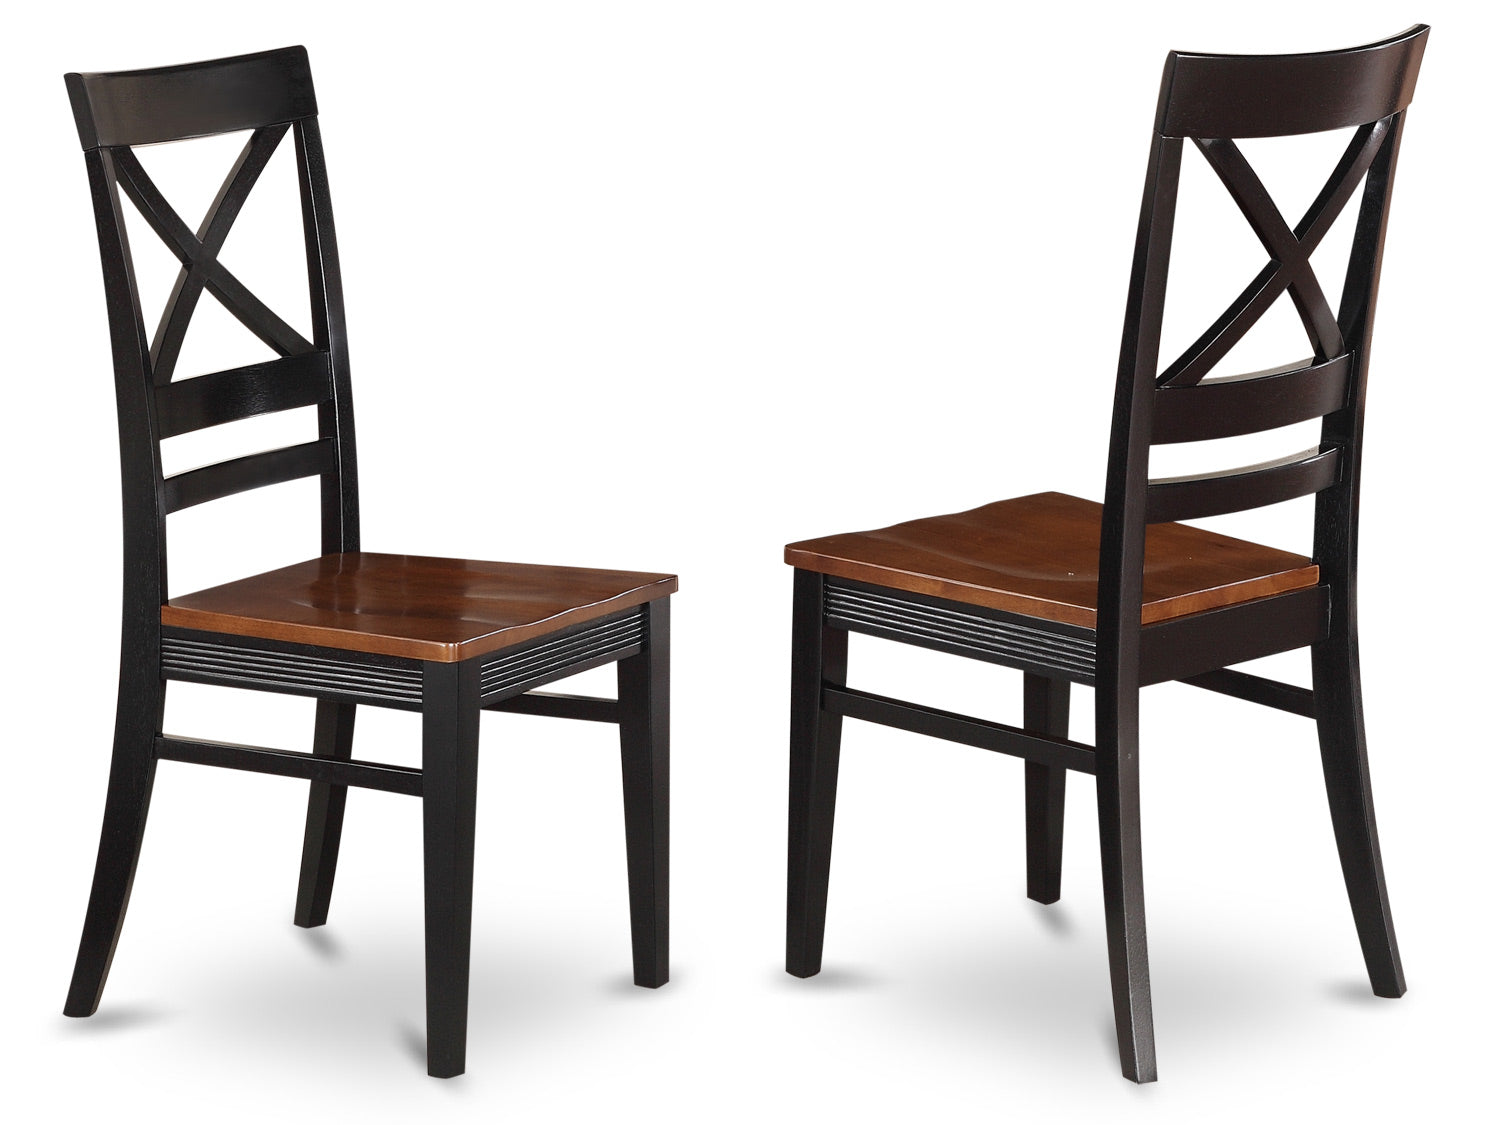 HLQU5-BCH-W 5 Pc set with a Round Dinette Table and 4 Leather Dinette Chairs in Black and Cherry